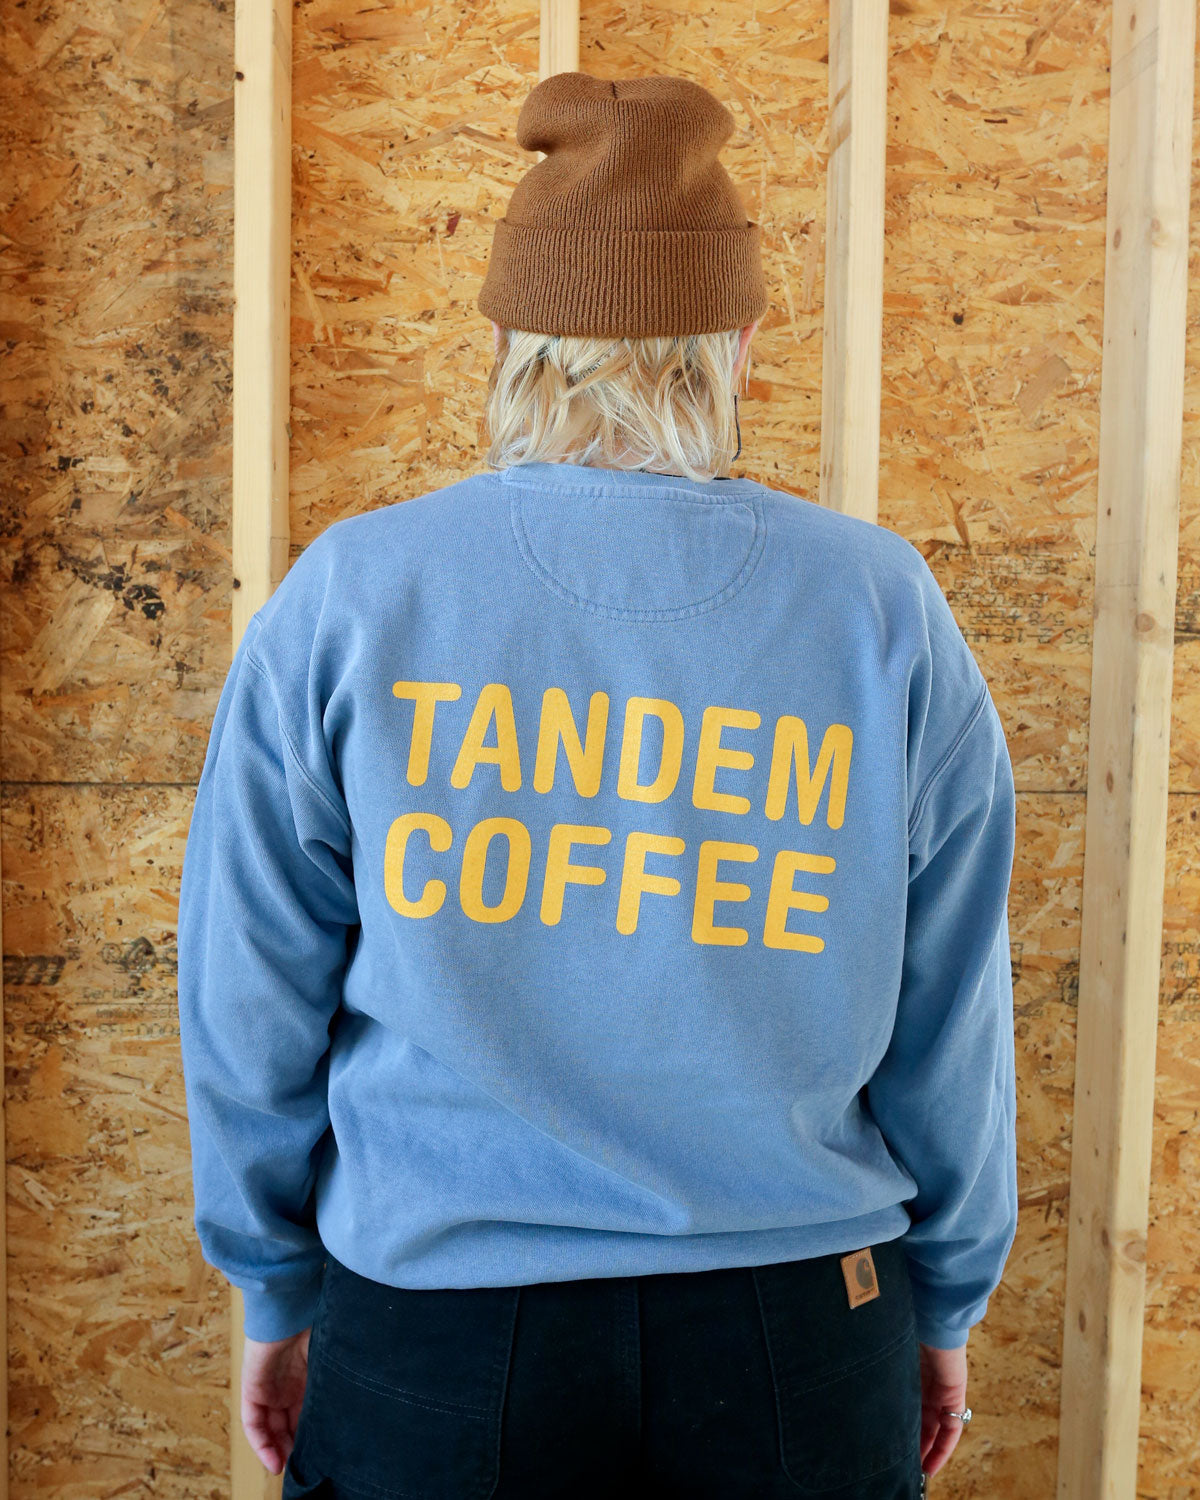 A person seen from behind wearing a blue Tandem Coffee Roasters crewneck sweatshirt with "Tandem Coffee" printed in yellow letters, a brown beanie, and black pants, standing in front of a plywood wall.